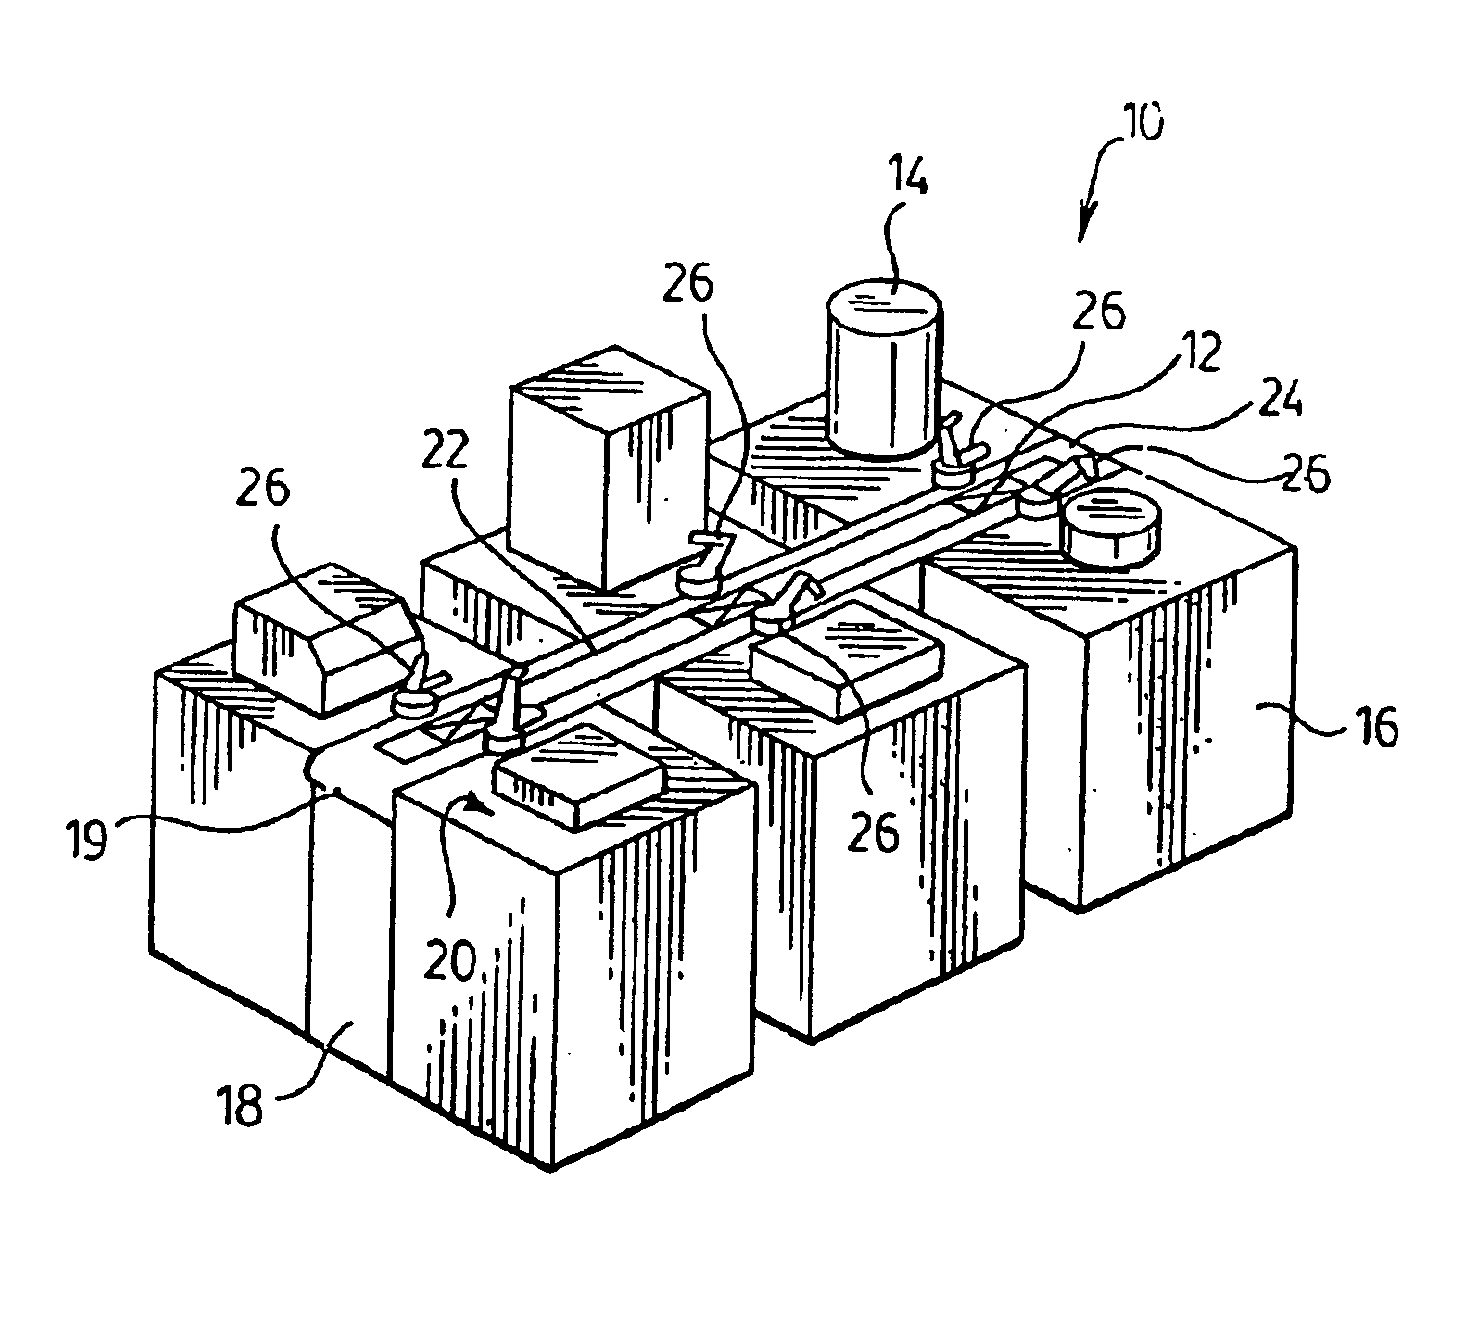 Modular robotic system and method for sample processing